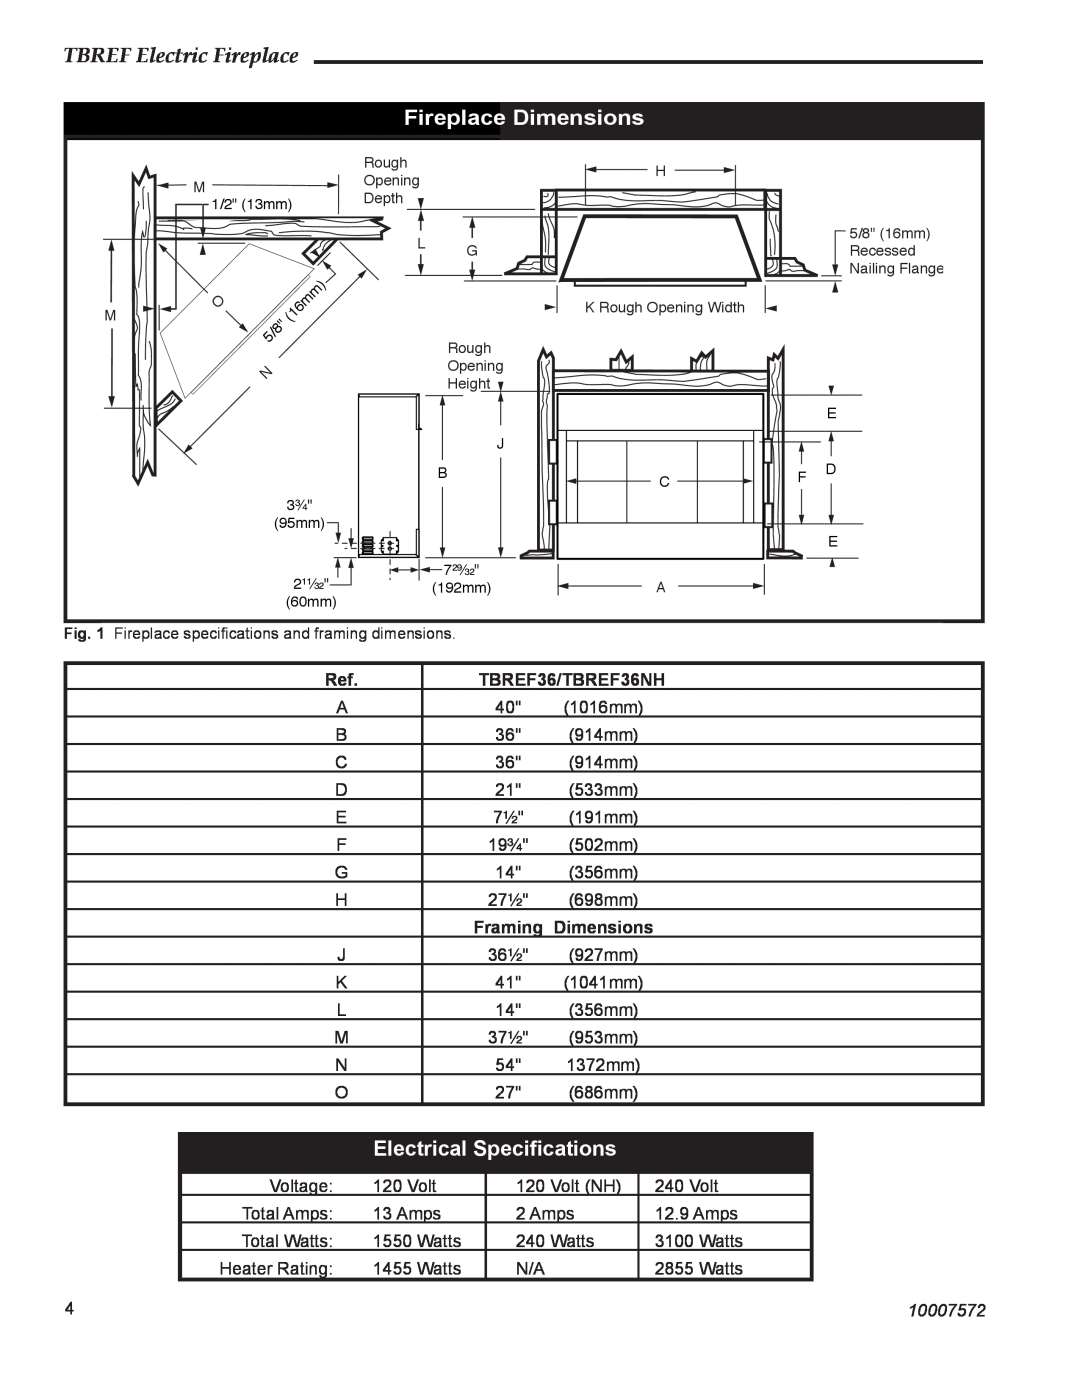 Vermont Casting Fireplace Dimensions, Electrical Speciﬁcations, TBREF Electric Fireplace, TBREF36/TBREF36NH, 10007572 